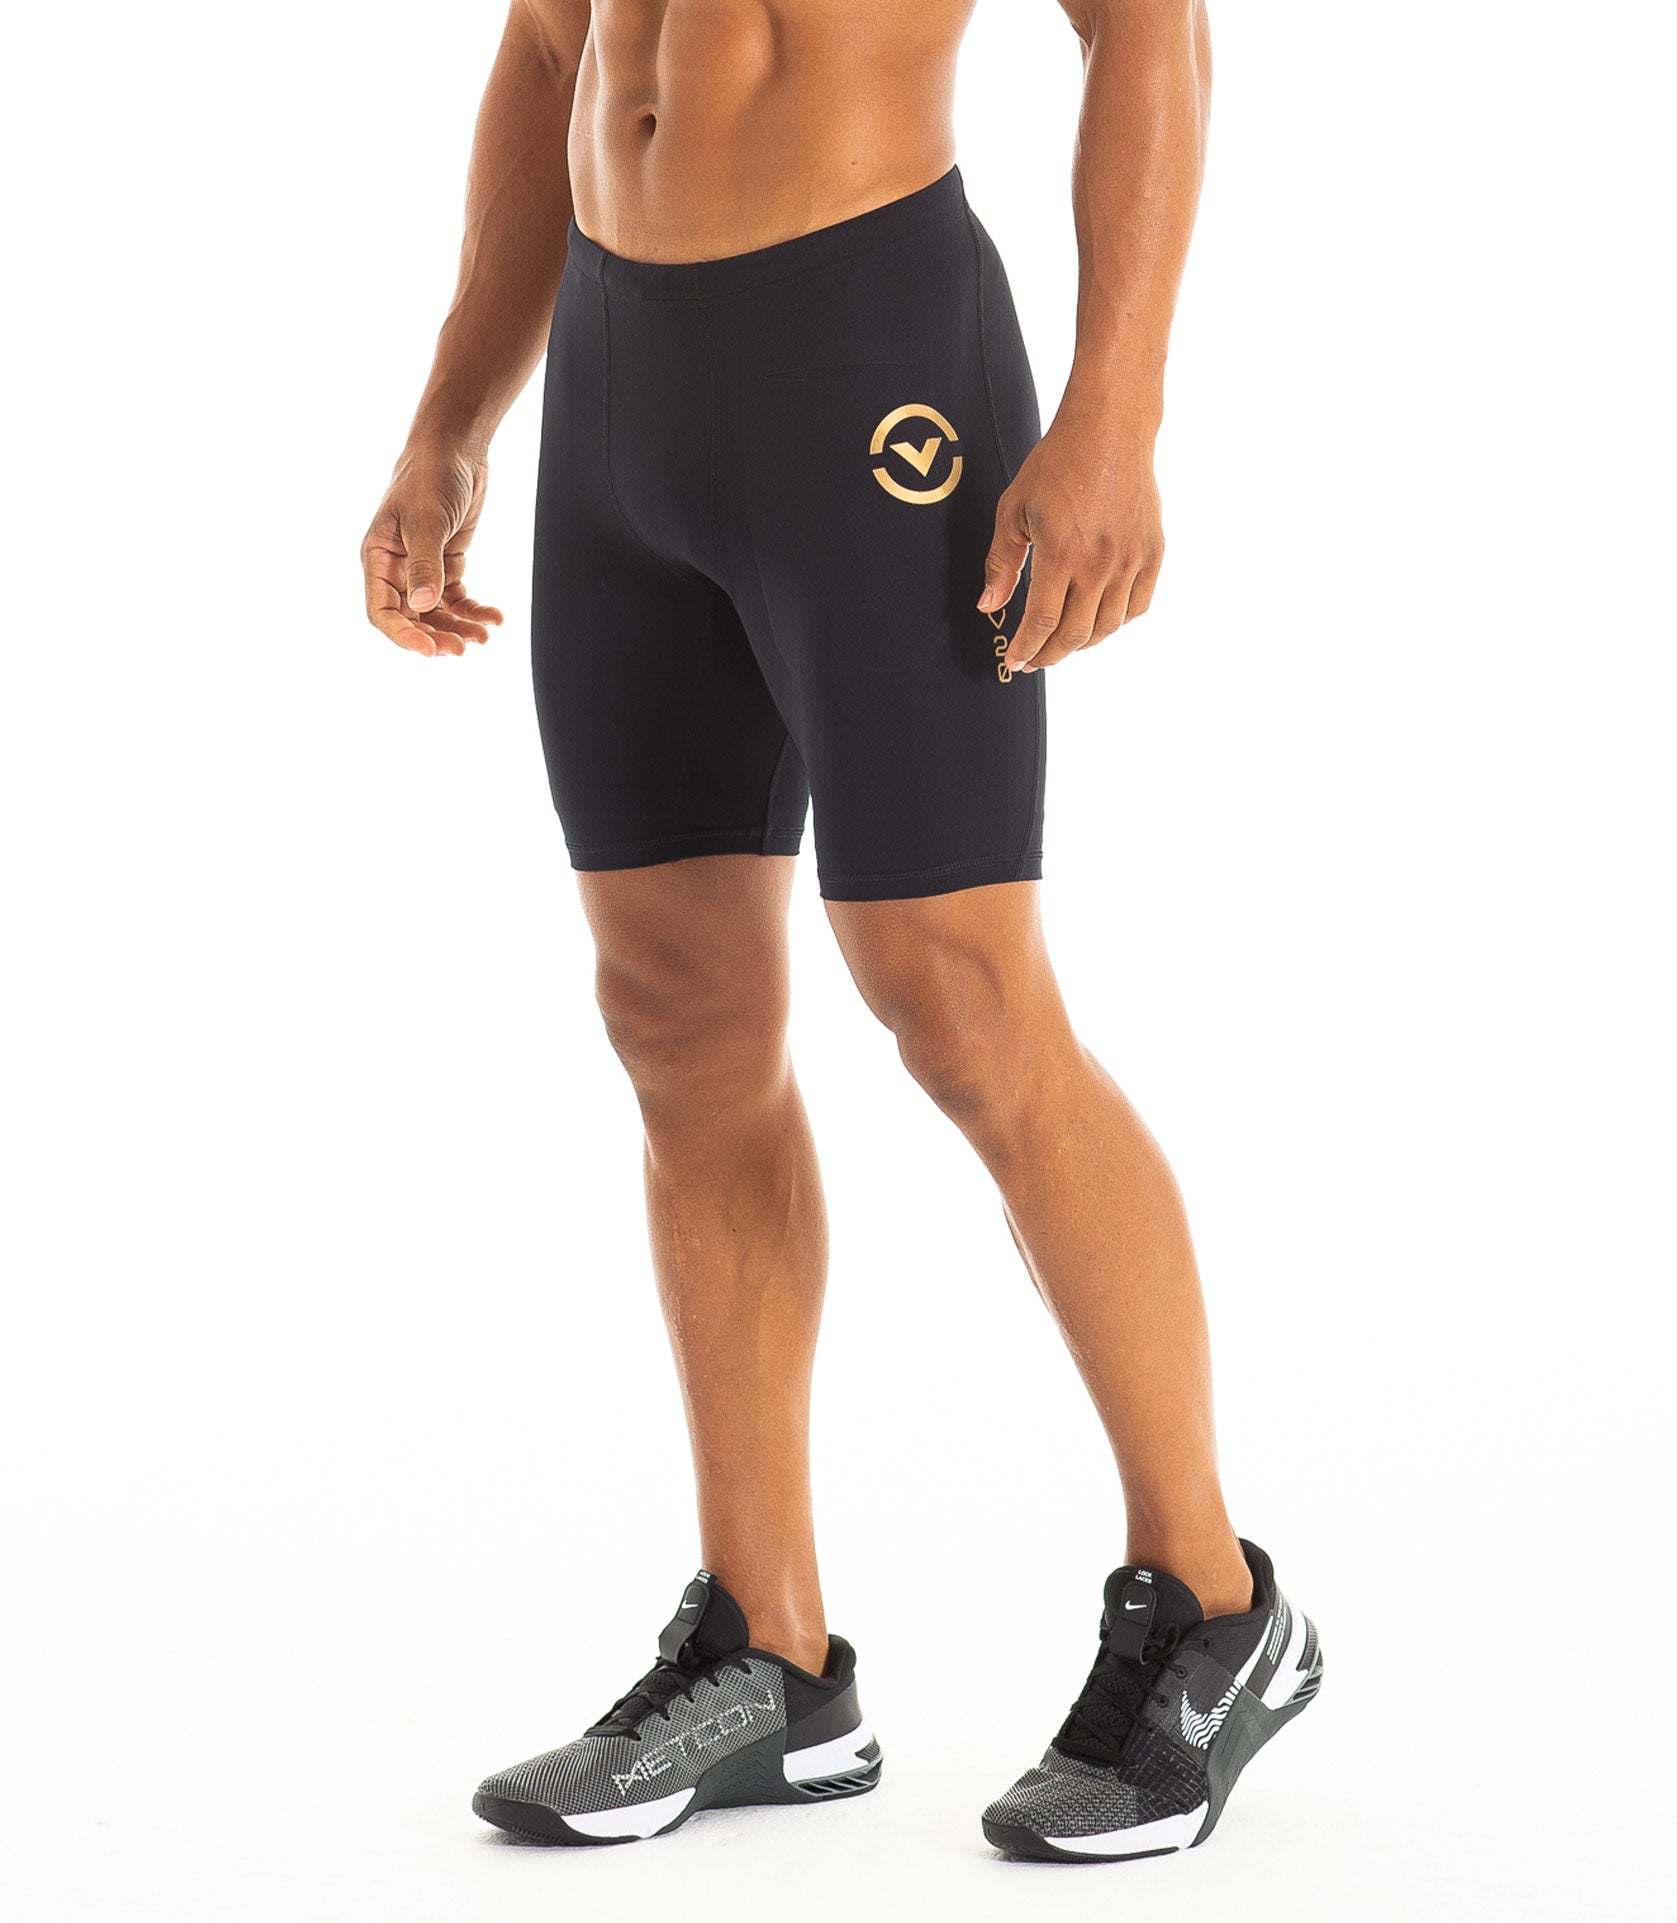 Men Wear Compression Shorts In Public  International Society of Precision  Agriculture